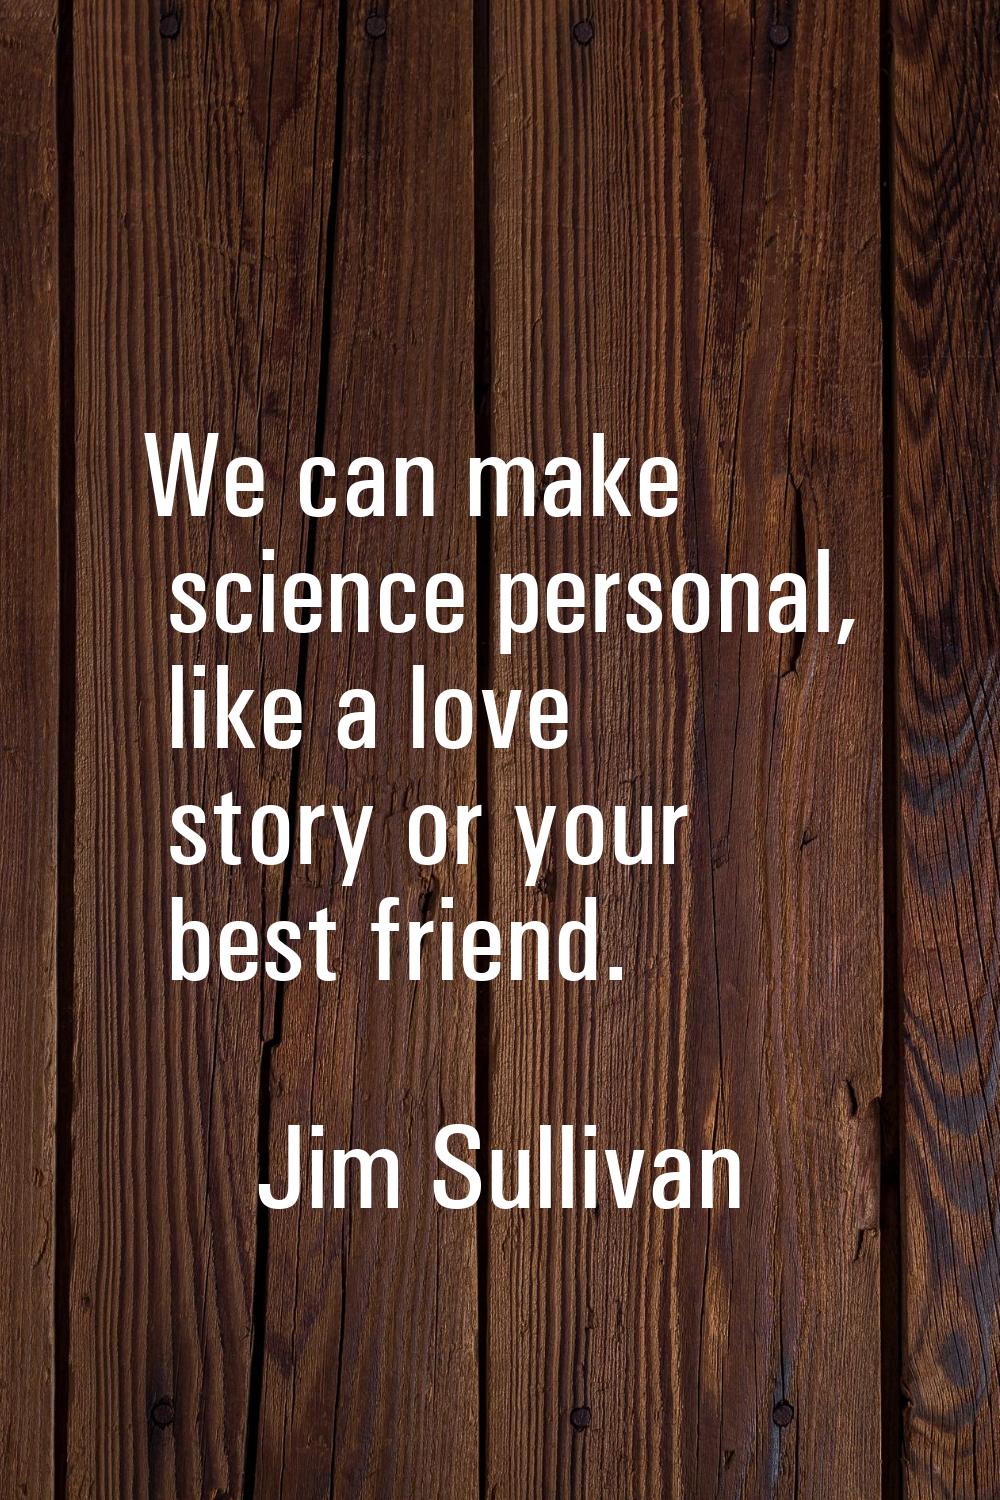 We can make science personal, like a love story or your best friend.